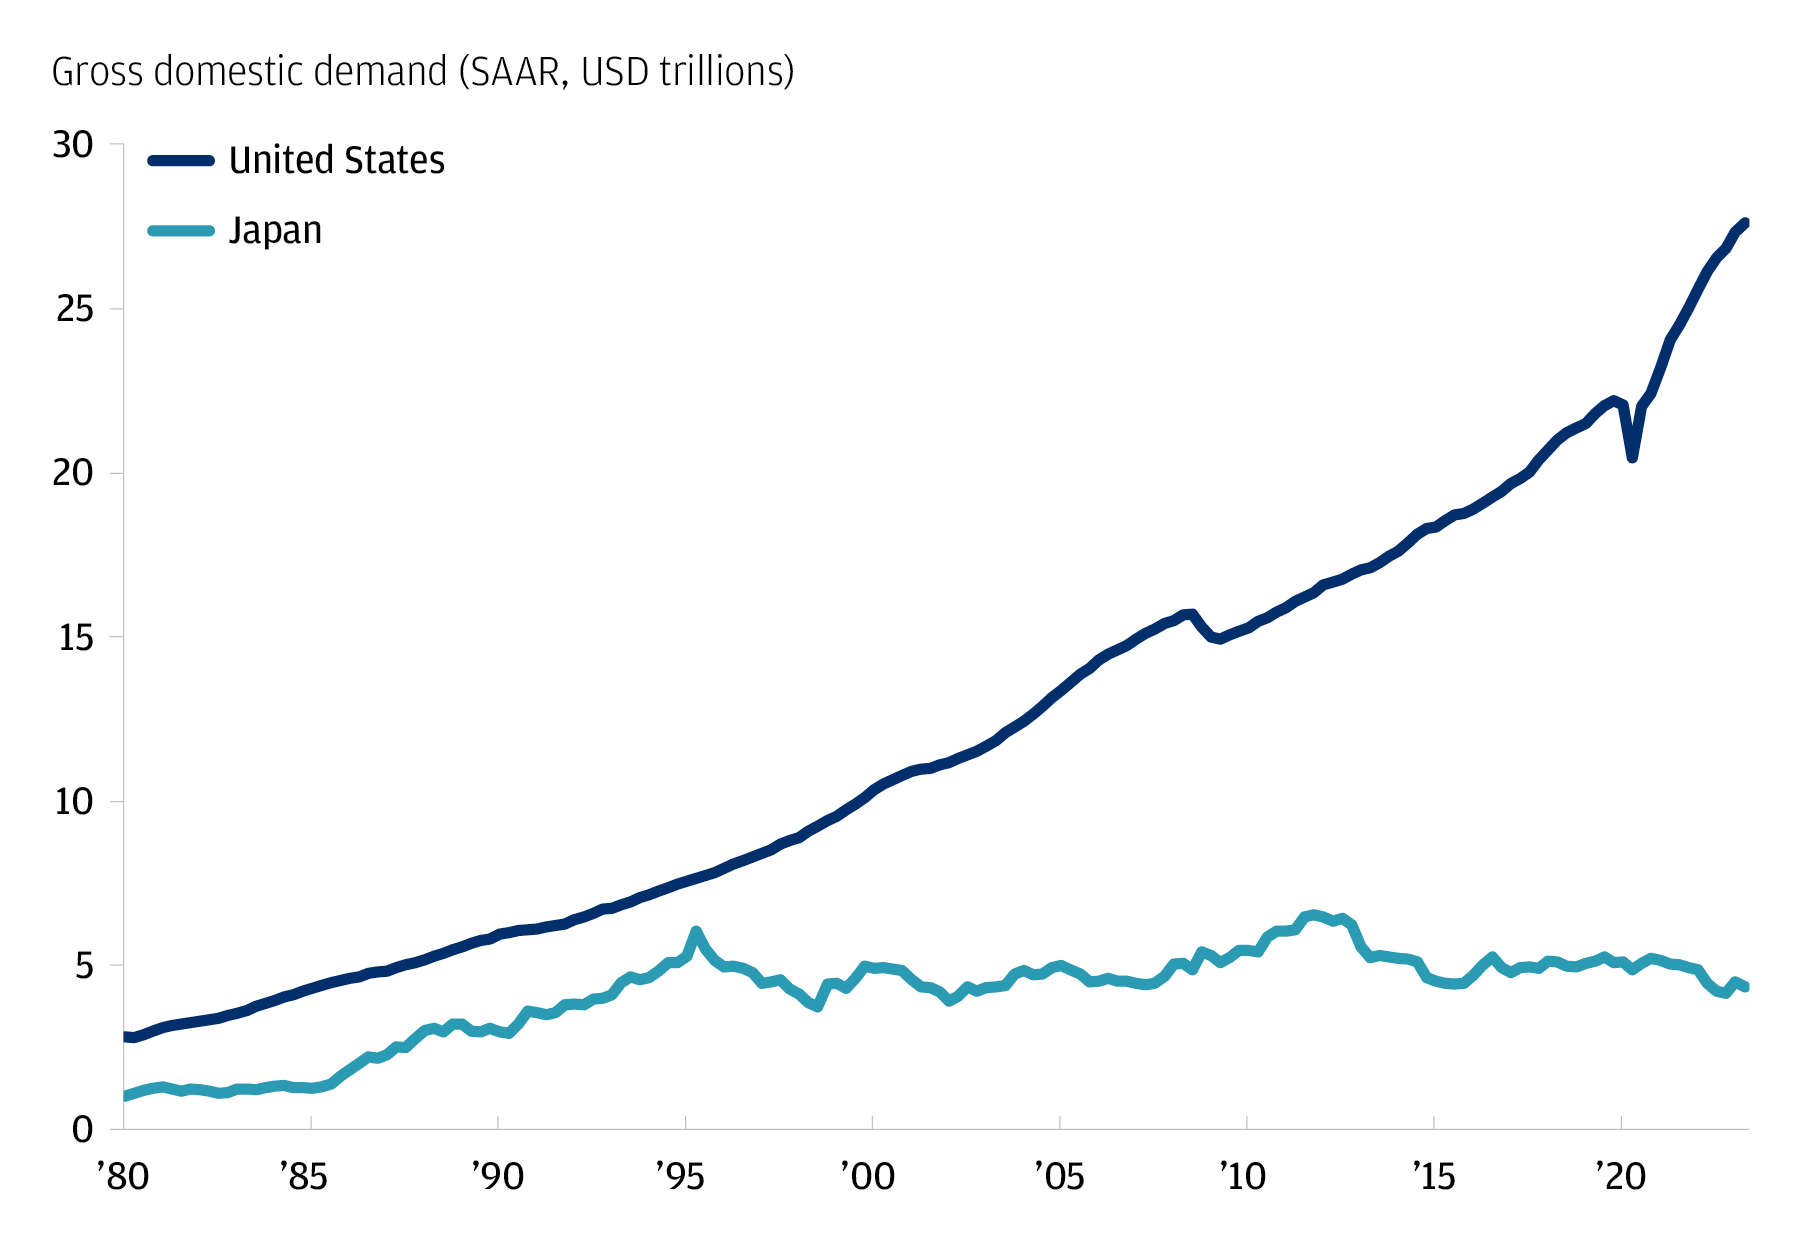 The chart describes the gross domestic demand in Trillion USD for U.S. and Japan. 